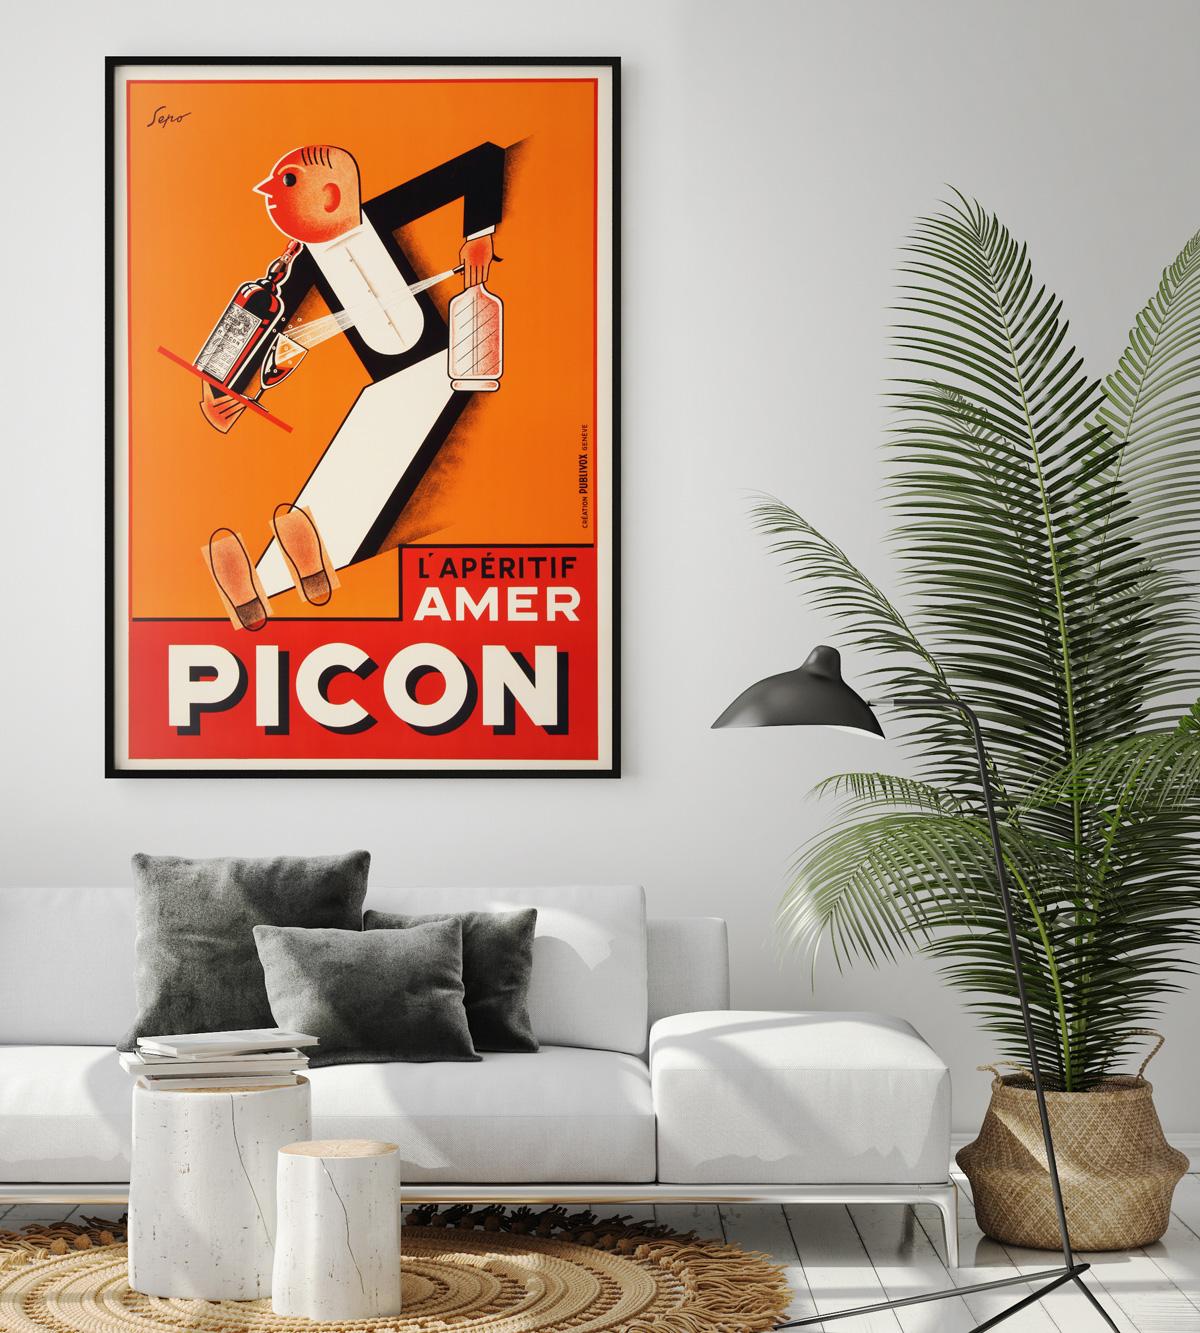 Wonderful original vintage French Amer Picon alcohol poster designed by Severo Pozzati. Severo Pozzati, known under the pseudonym 'Sepo' , was an Italian painter and sculptor. He studied at the Academy of Fine Arts in Bologna, where he graduated in